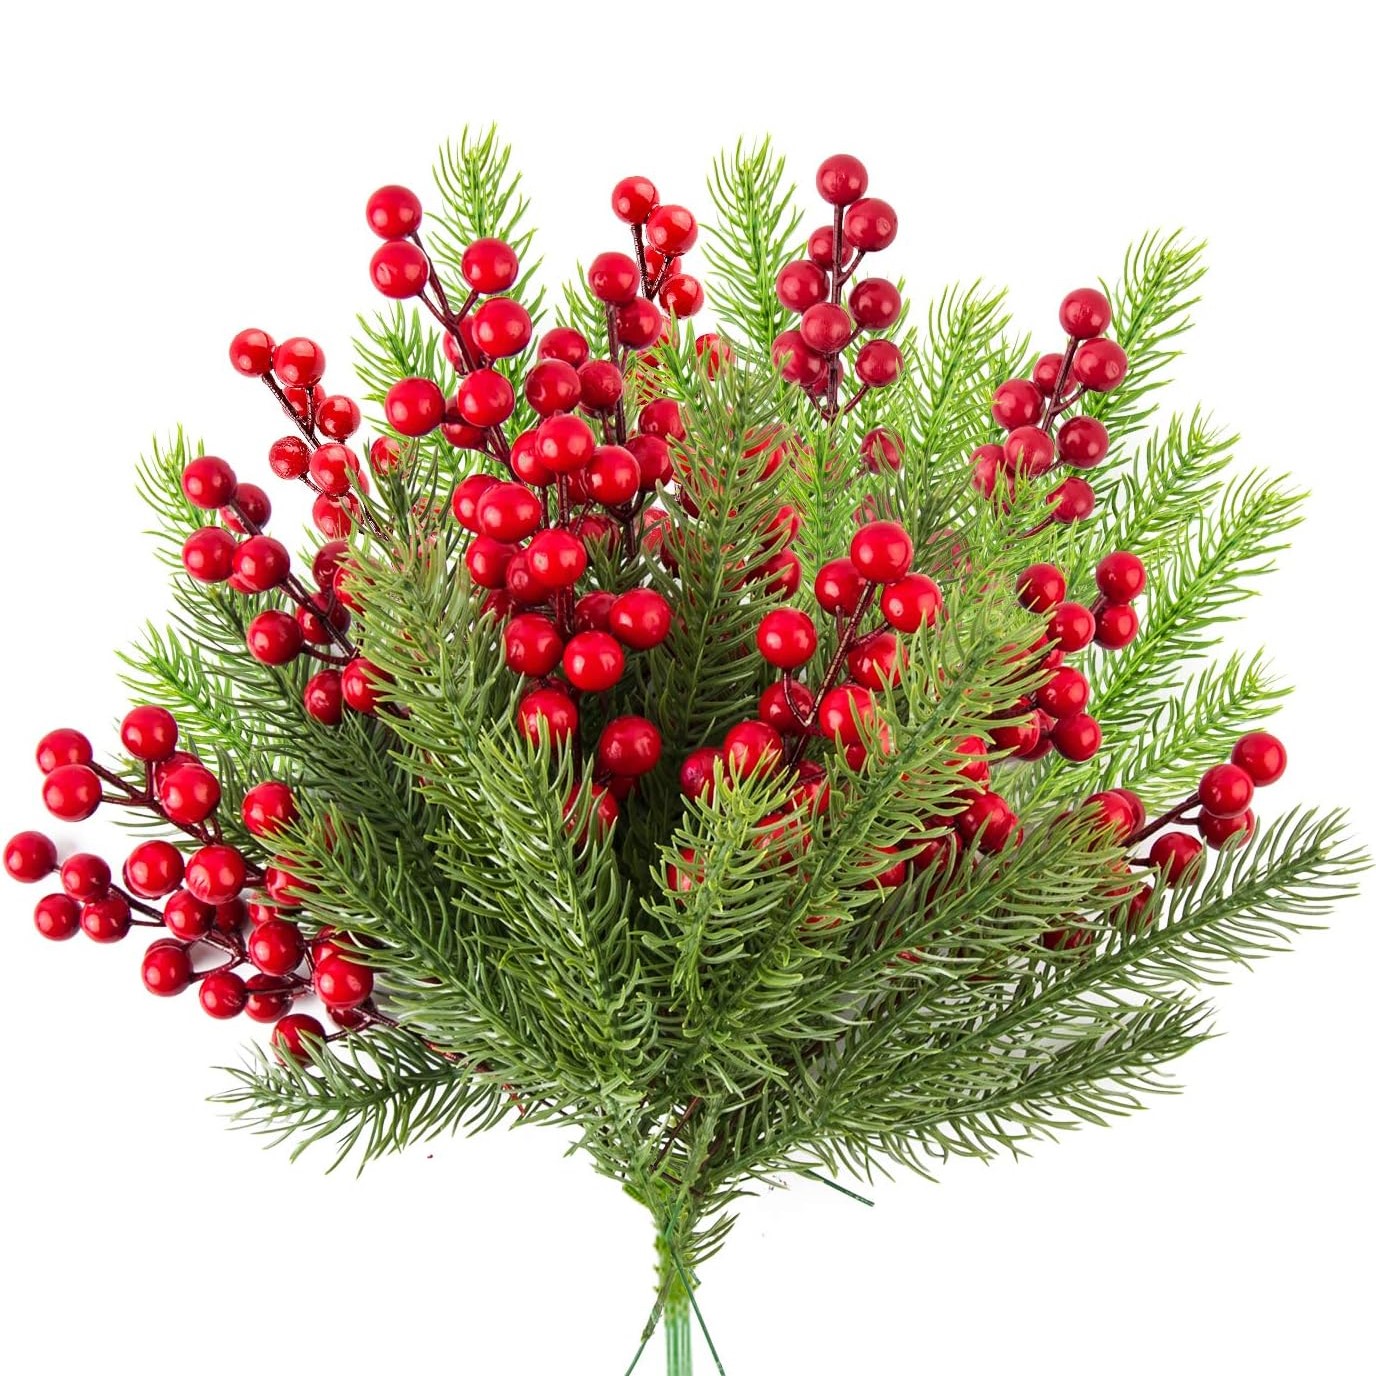 12 Pcs Artificial Christmas Berries Red Berry Stems Pine Branches